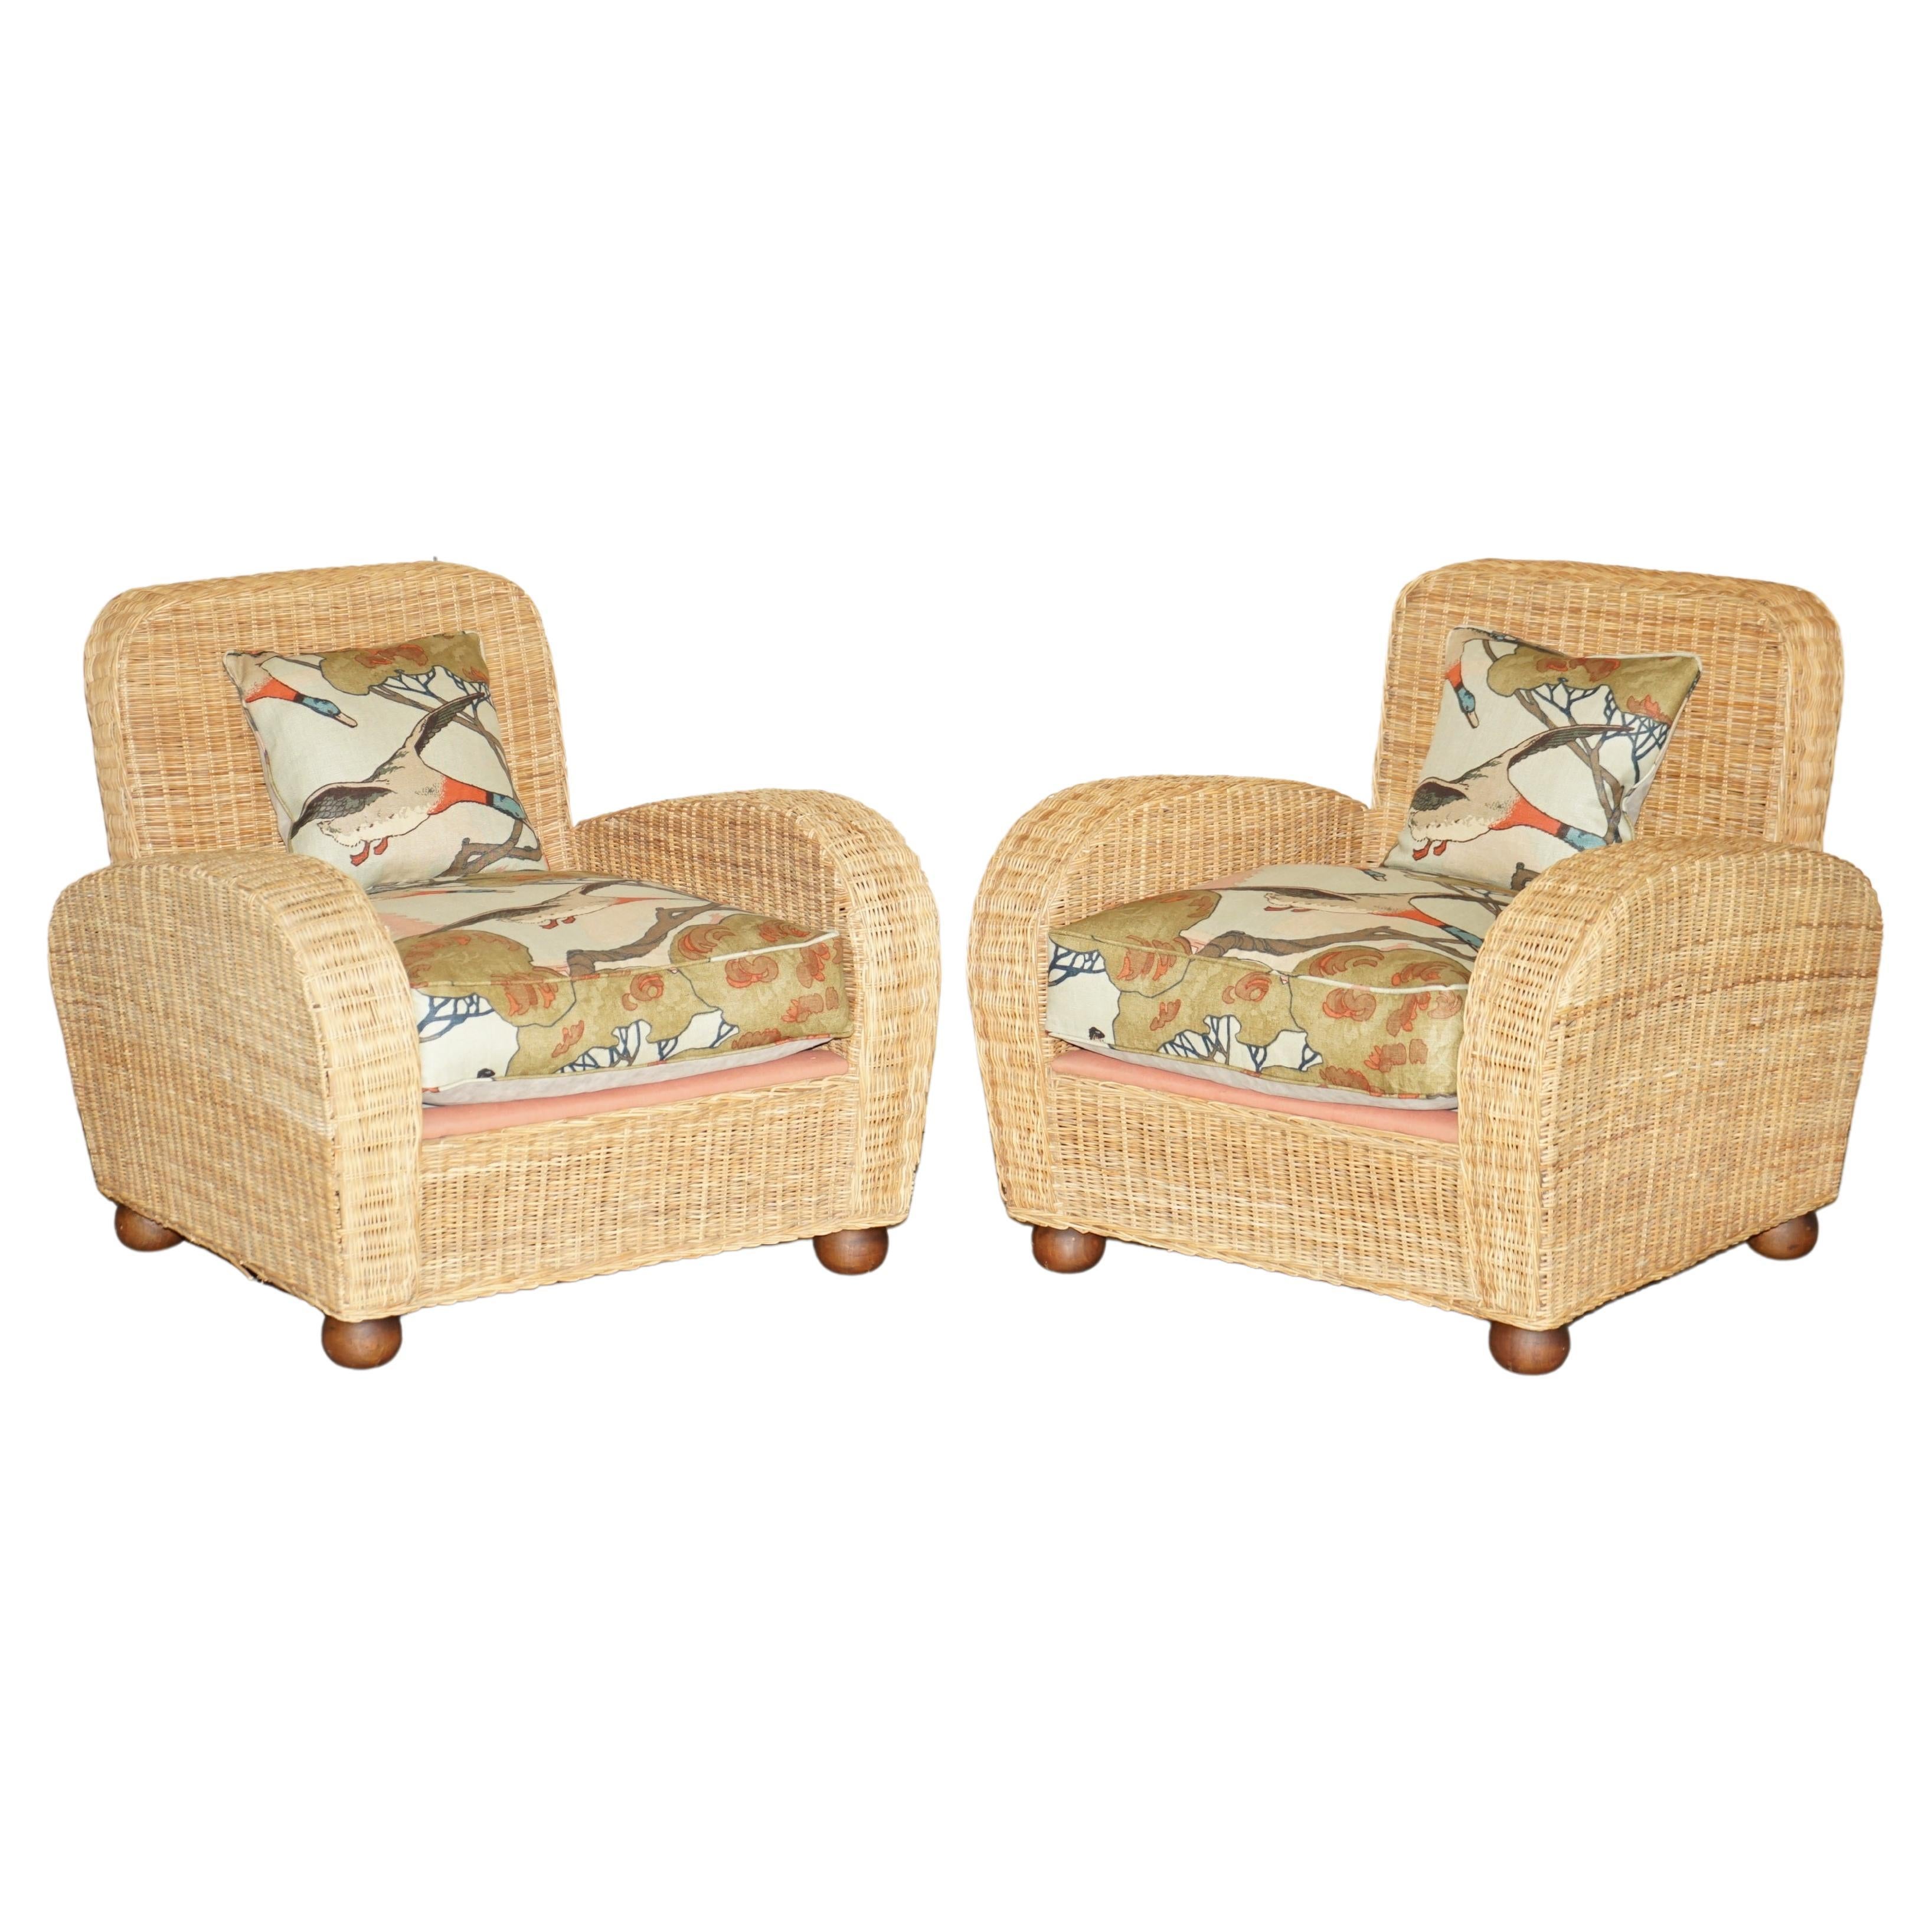 PAIR OF ART DECO STYLE WICKER CLUB ARMCHAIRS WiTH MULBERRY FLYING DUCKS CUSHIONS